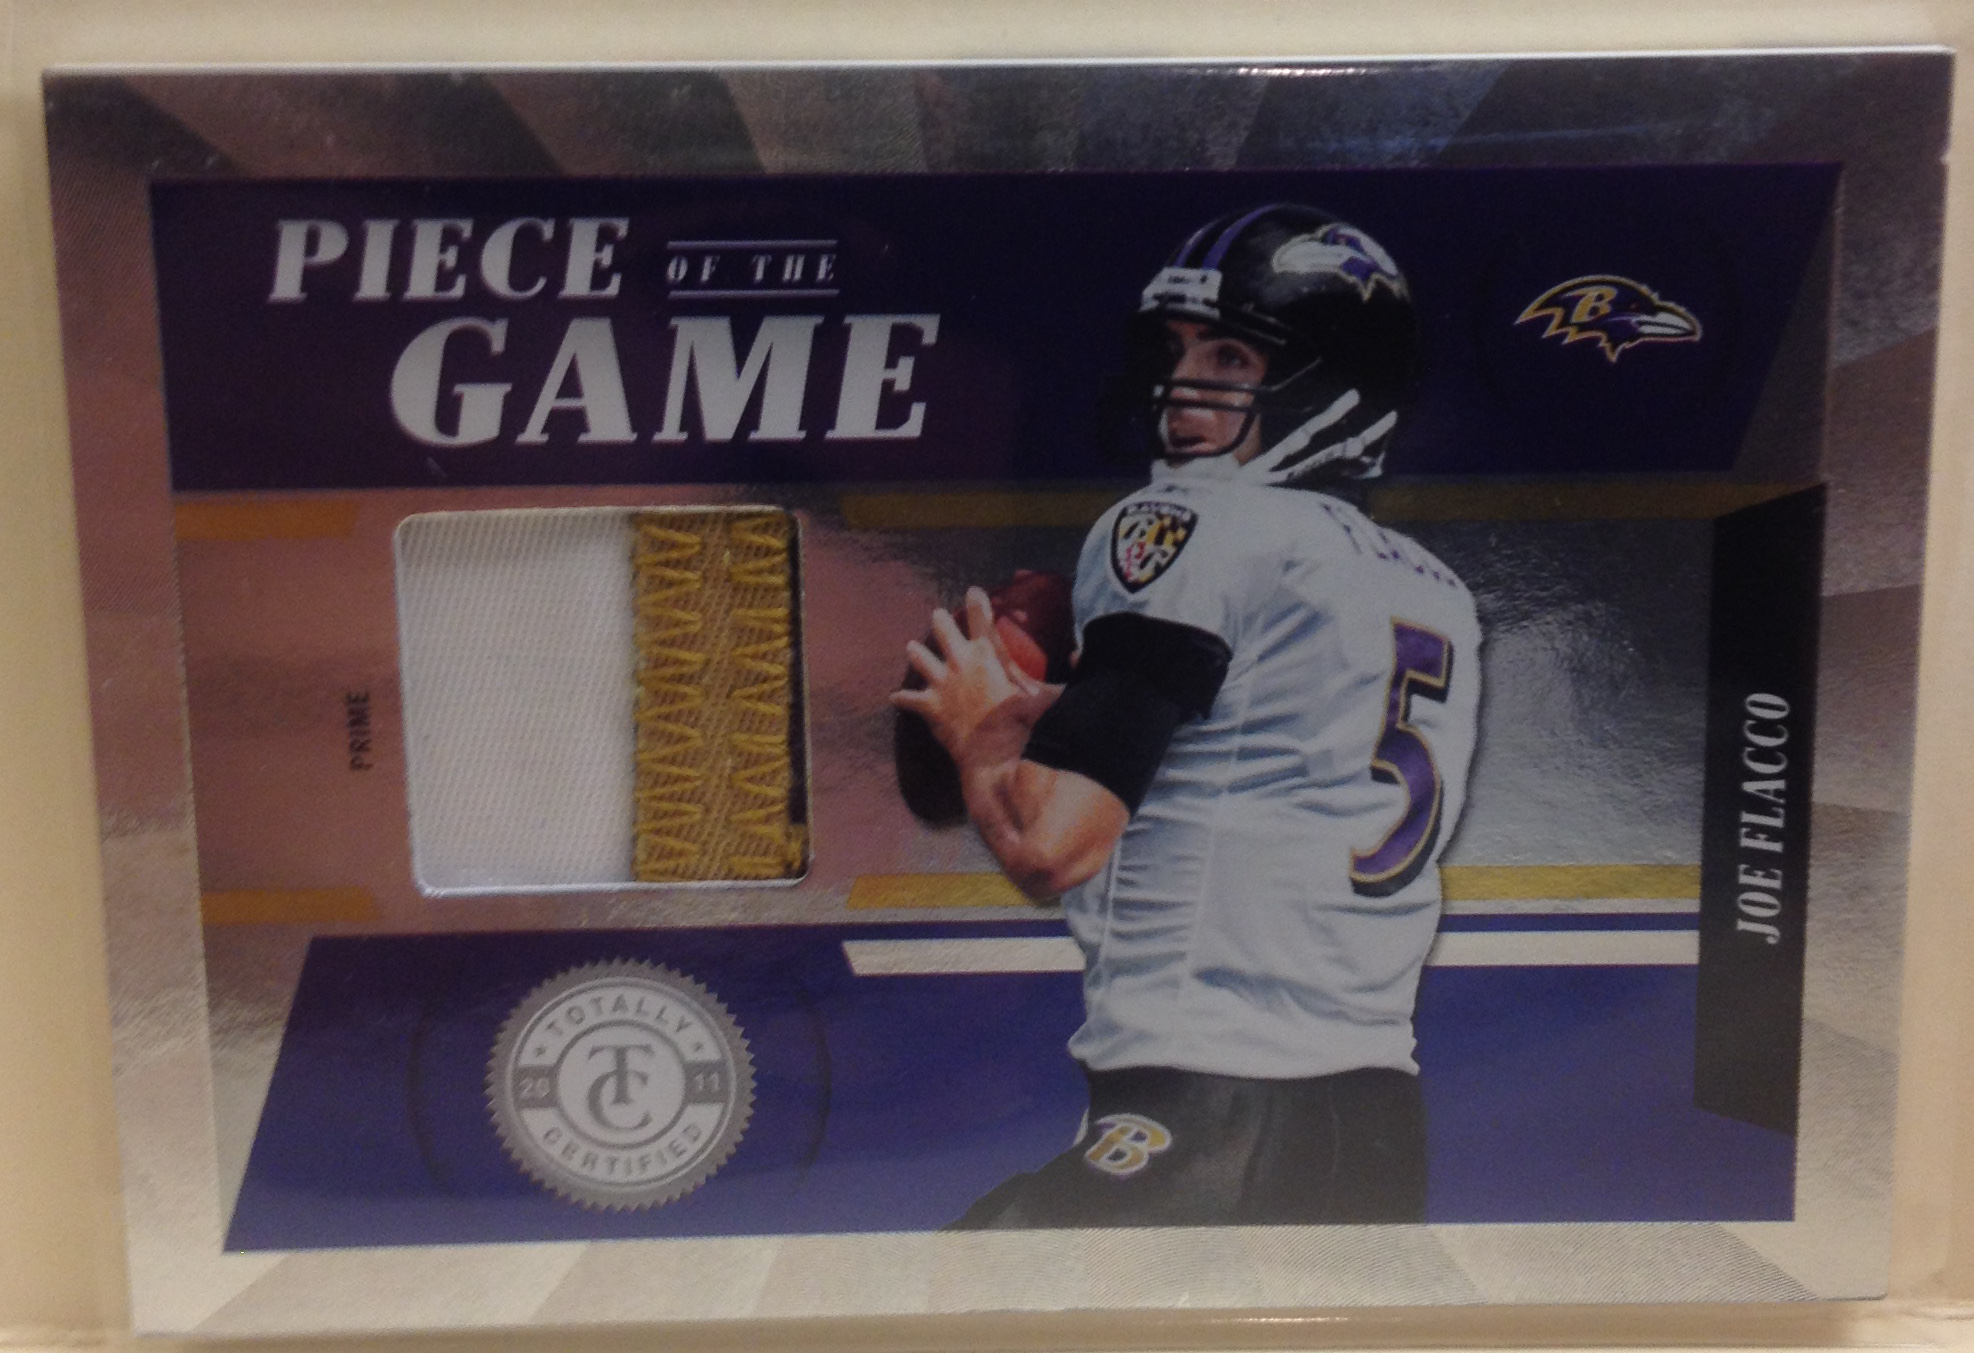 2011 Totally Certified Piece of the Game Prime #4 Joe Flacco/49